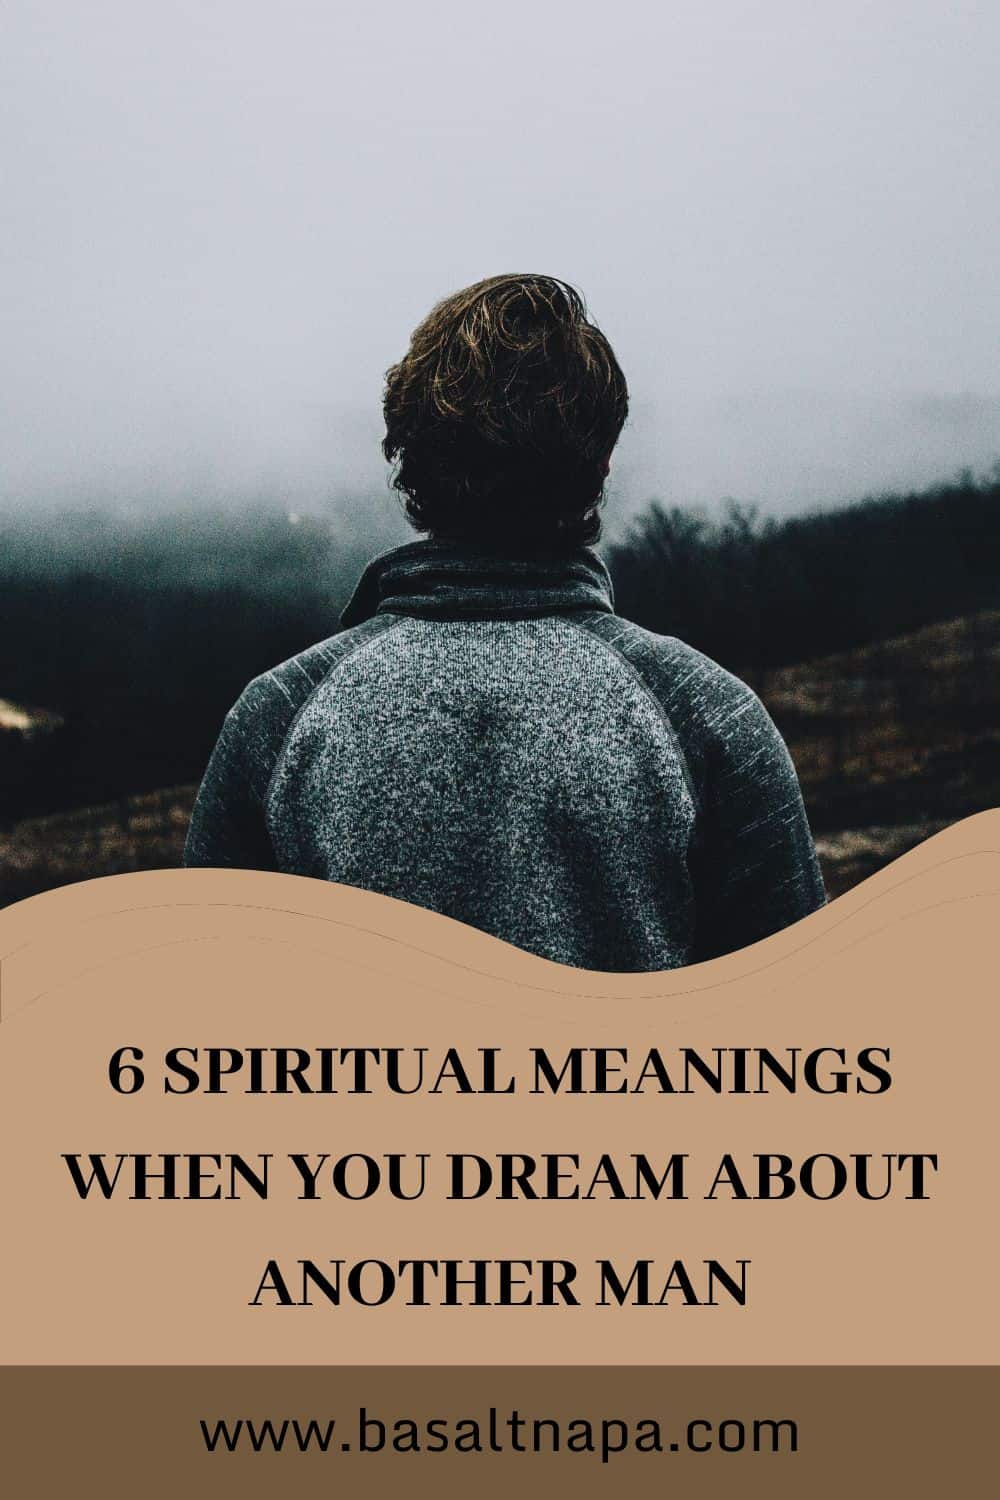 6 Meanings to dreaming about another man